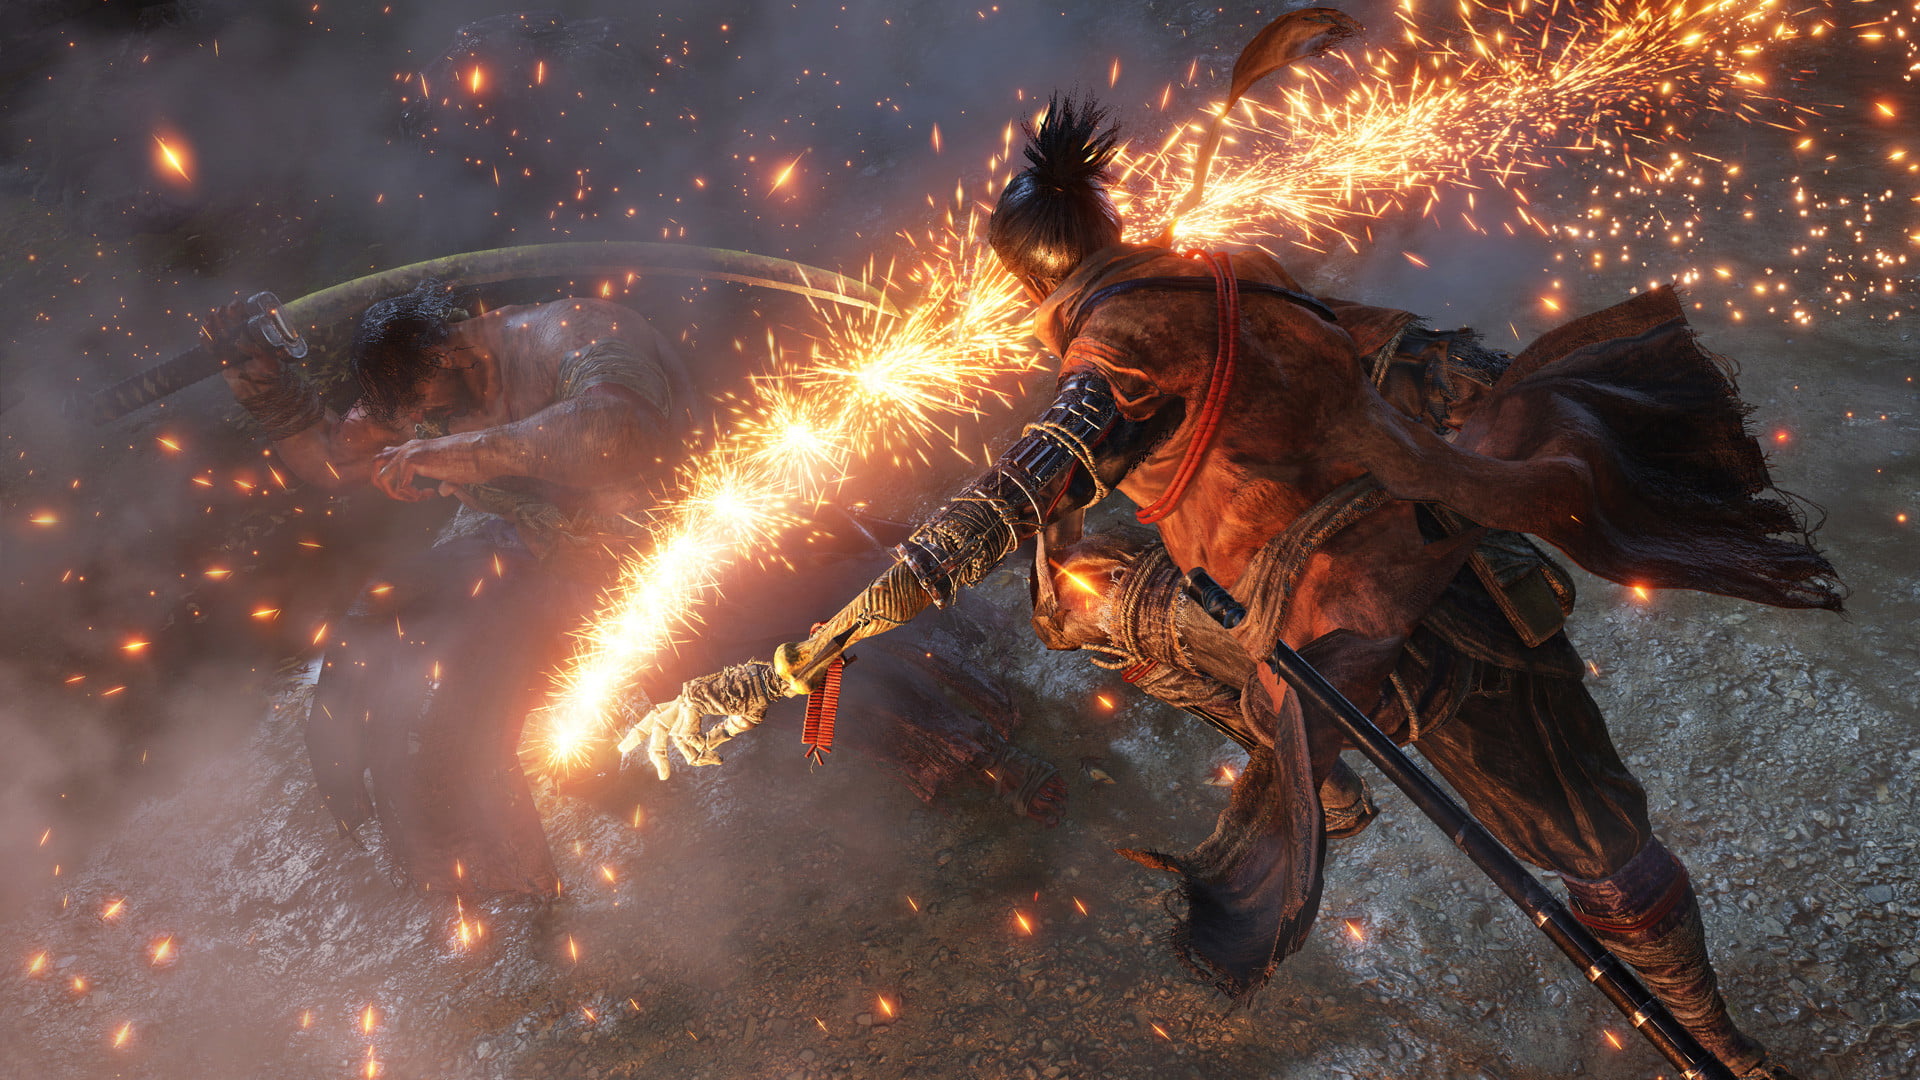 Sekiro Shadows Die Twice Gets An Easy Mode Thanks To This Mod